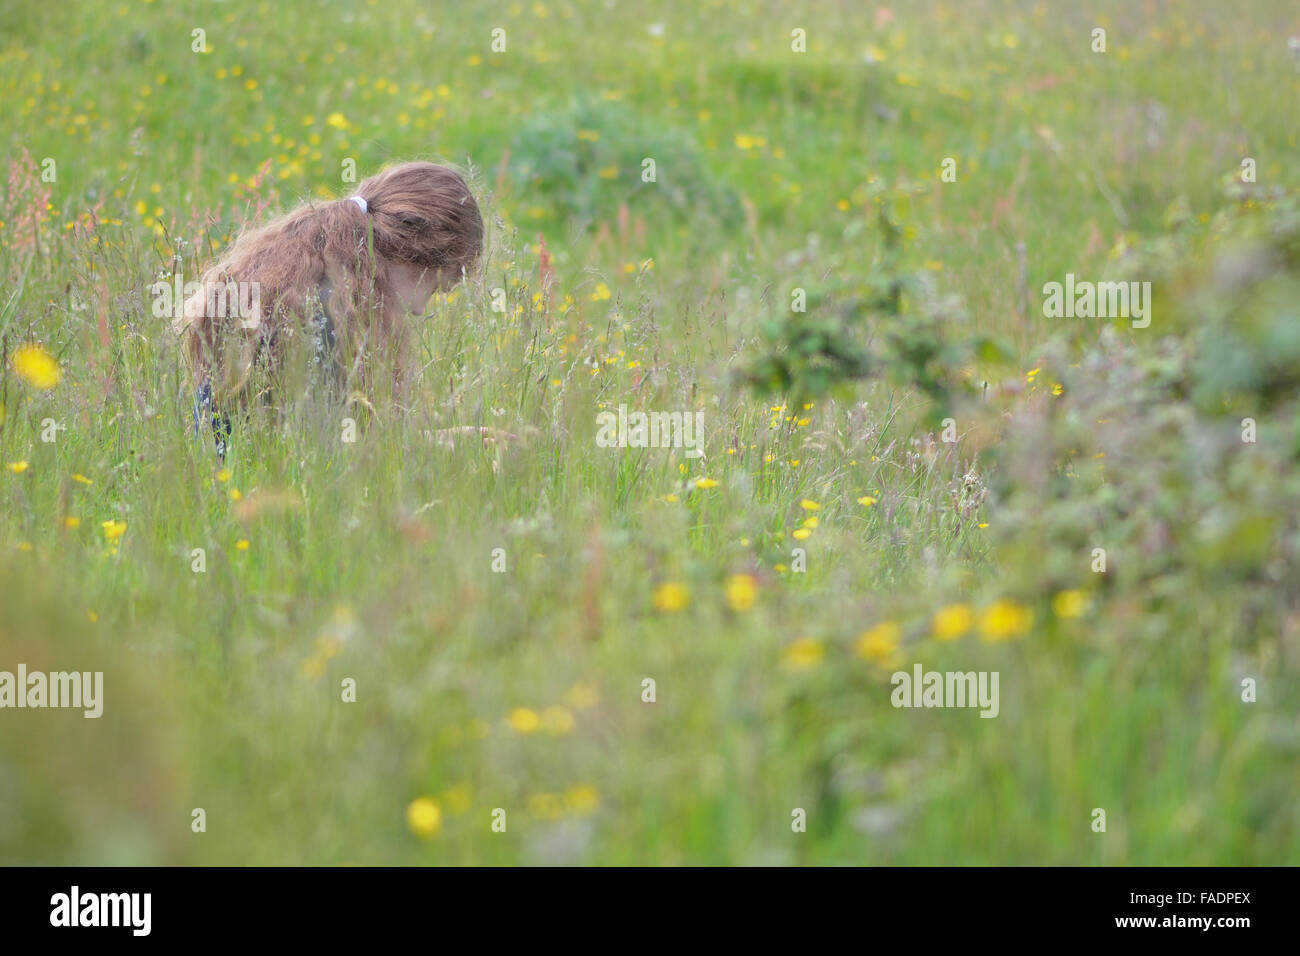 Girl sitting amongst grass and flowers in a meadow. A girl with exceptionally long golden hair sits with head bowed Stock Photo